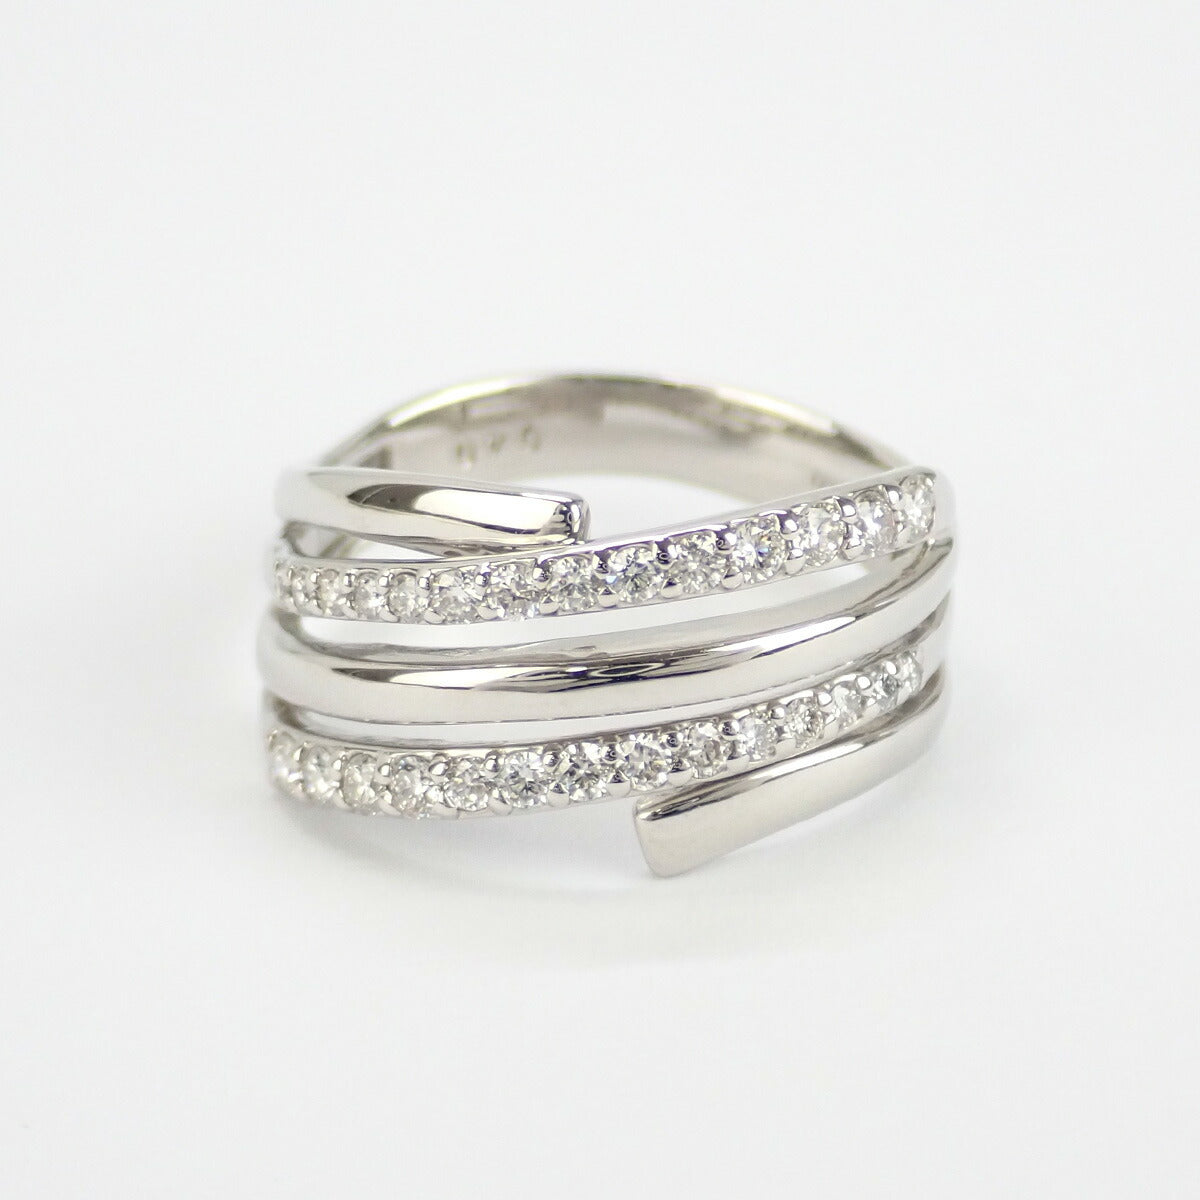 [LuxUness]  Platinum 900 Diamond Ring, Diamond 0.40ct, Size 12.5, Silver Finish, Ladies (Pre-owned) in Excellent condition